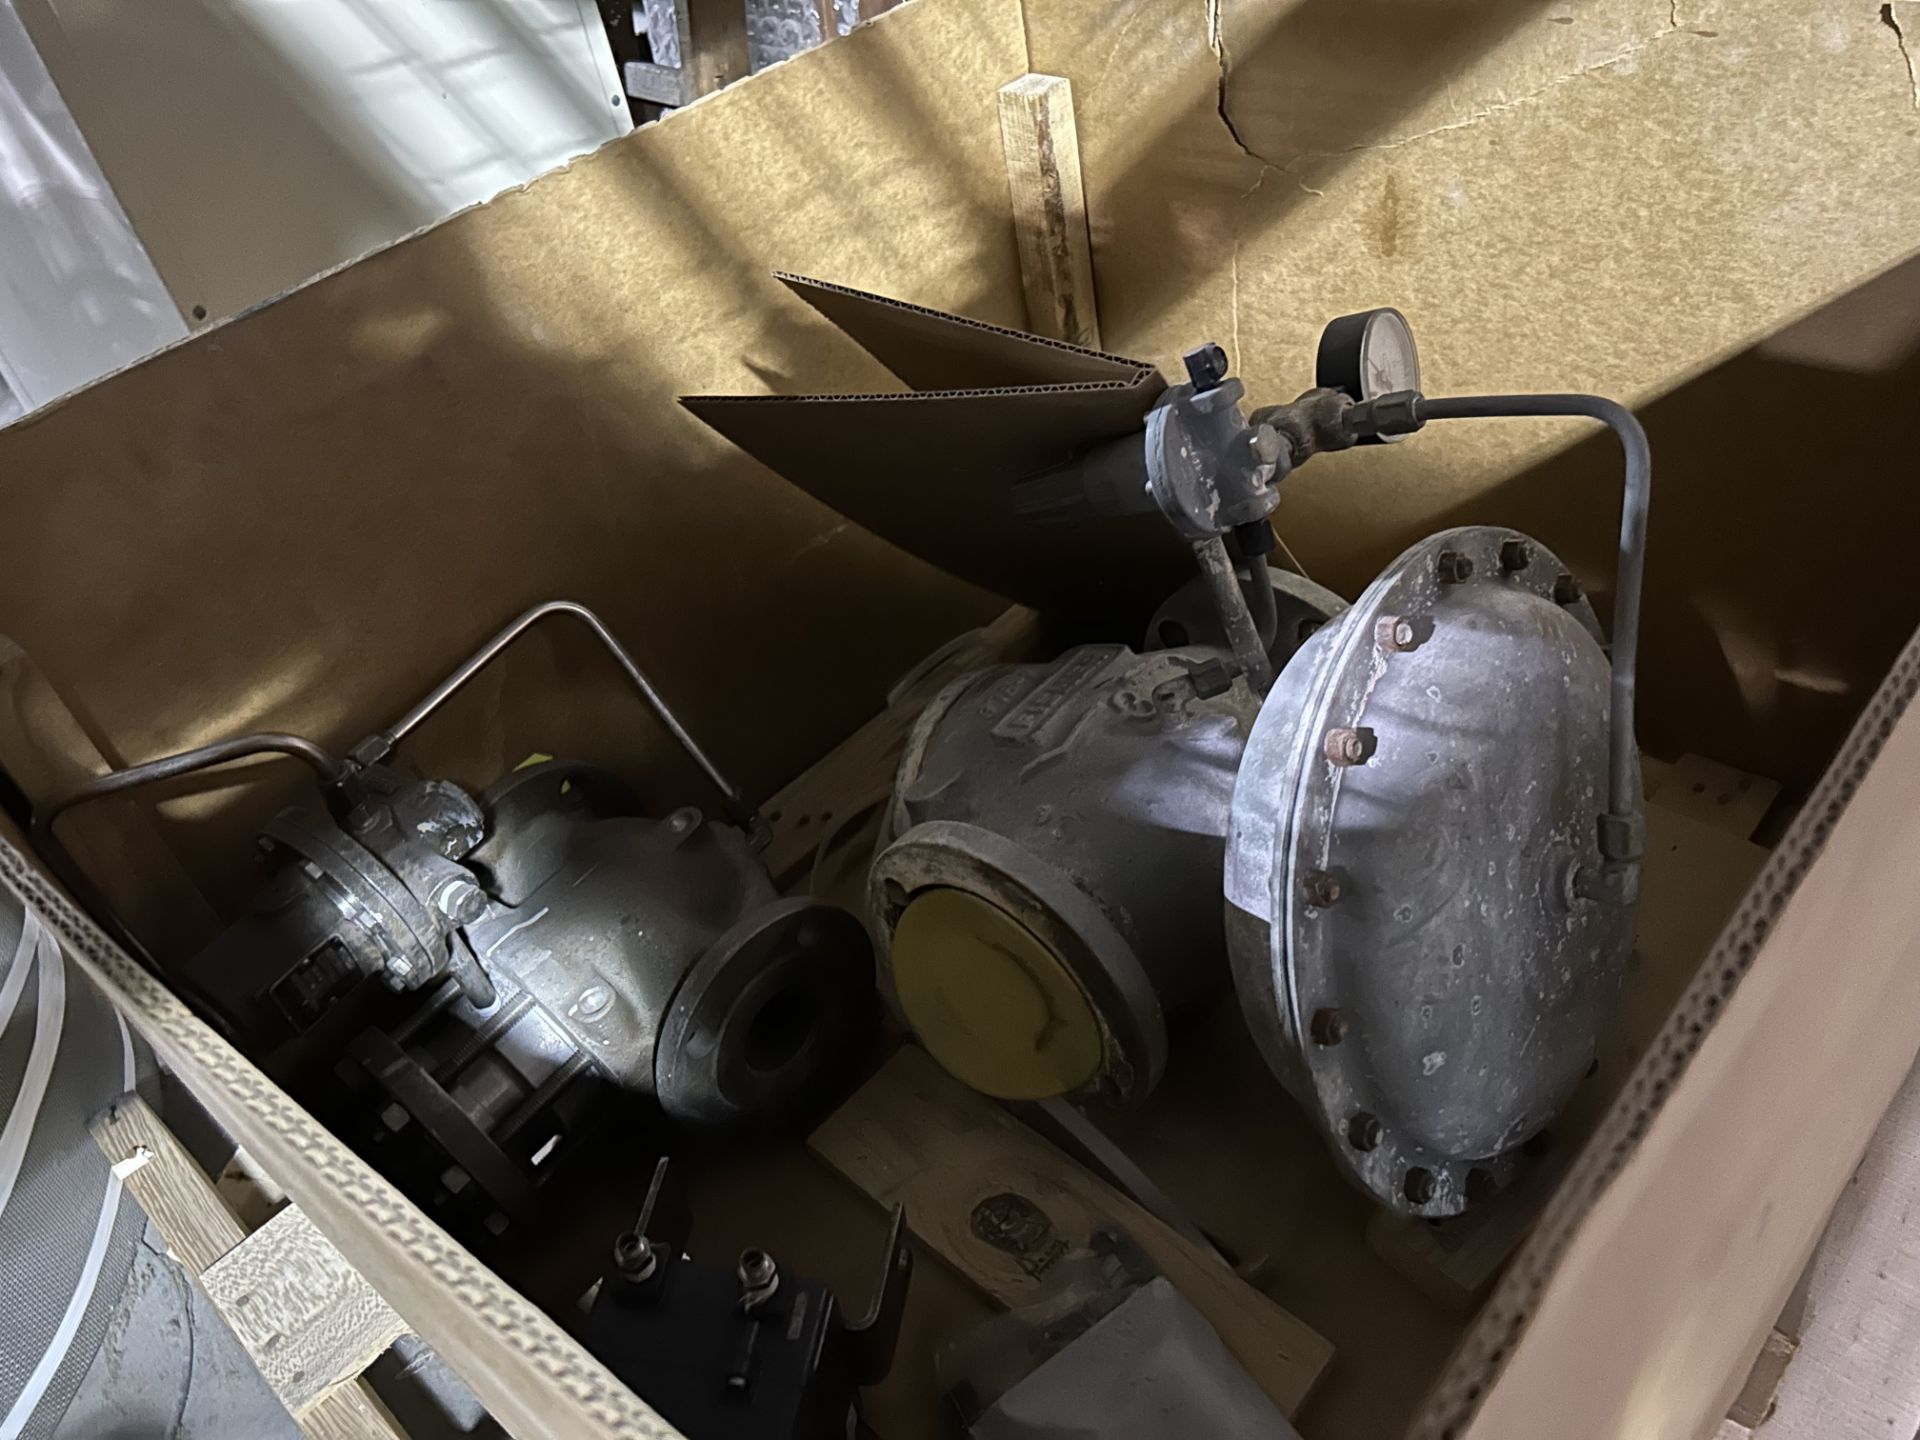 Double Valve Pump, Rigging & Loading Fee: $75 - Image 3 of 4